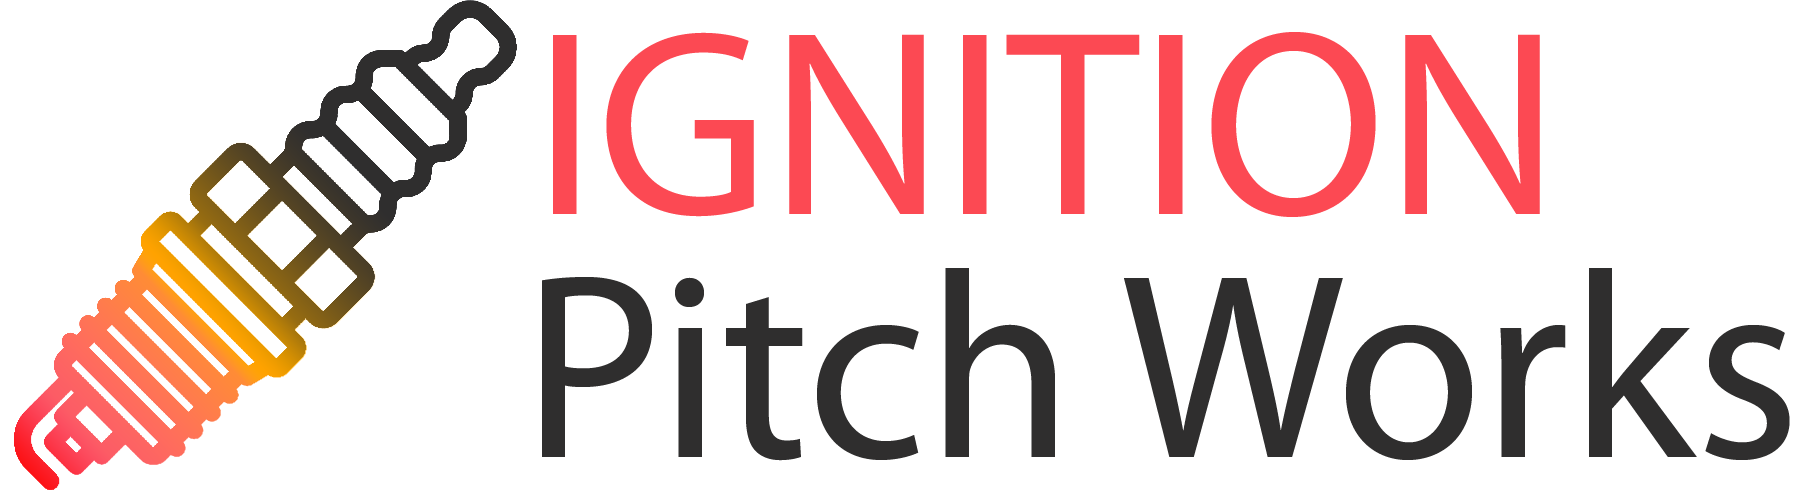 Introducing IGNITION Pitch Works: Pitch Deck Consultancy for Business Founders Seeking Pre-Seed to Series-A Capital